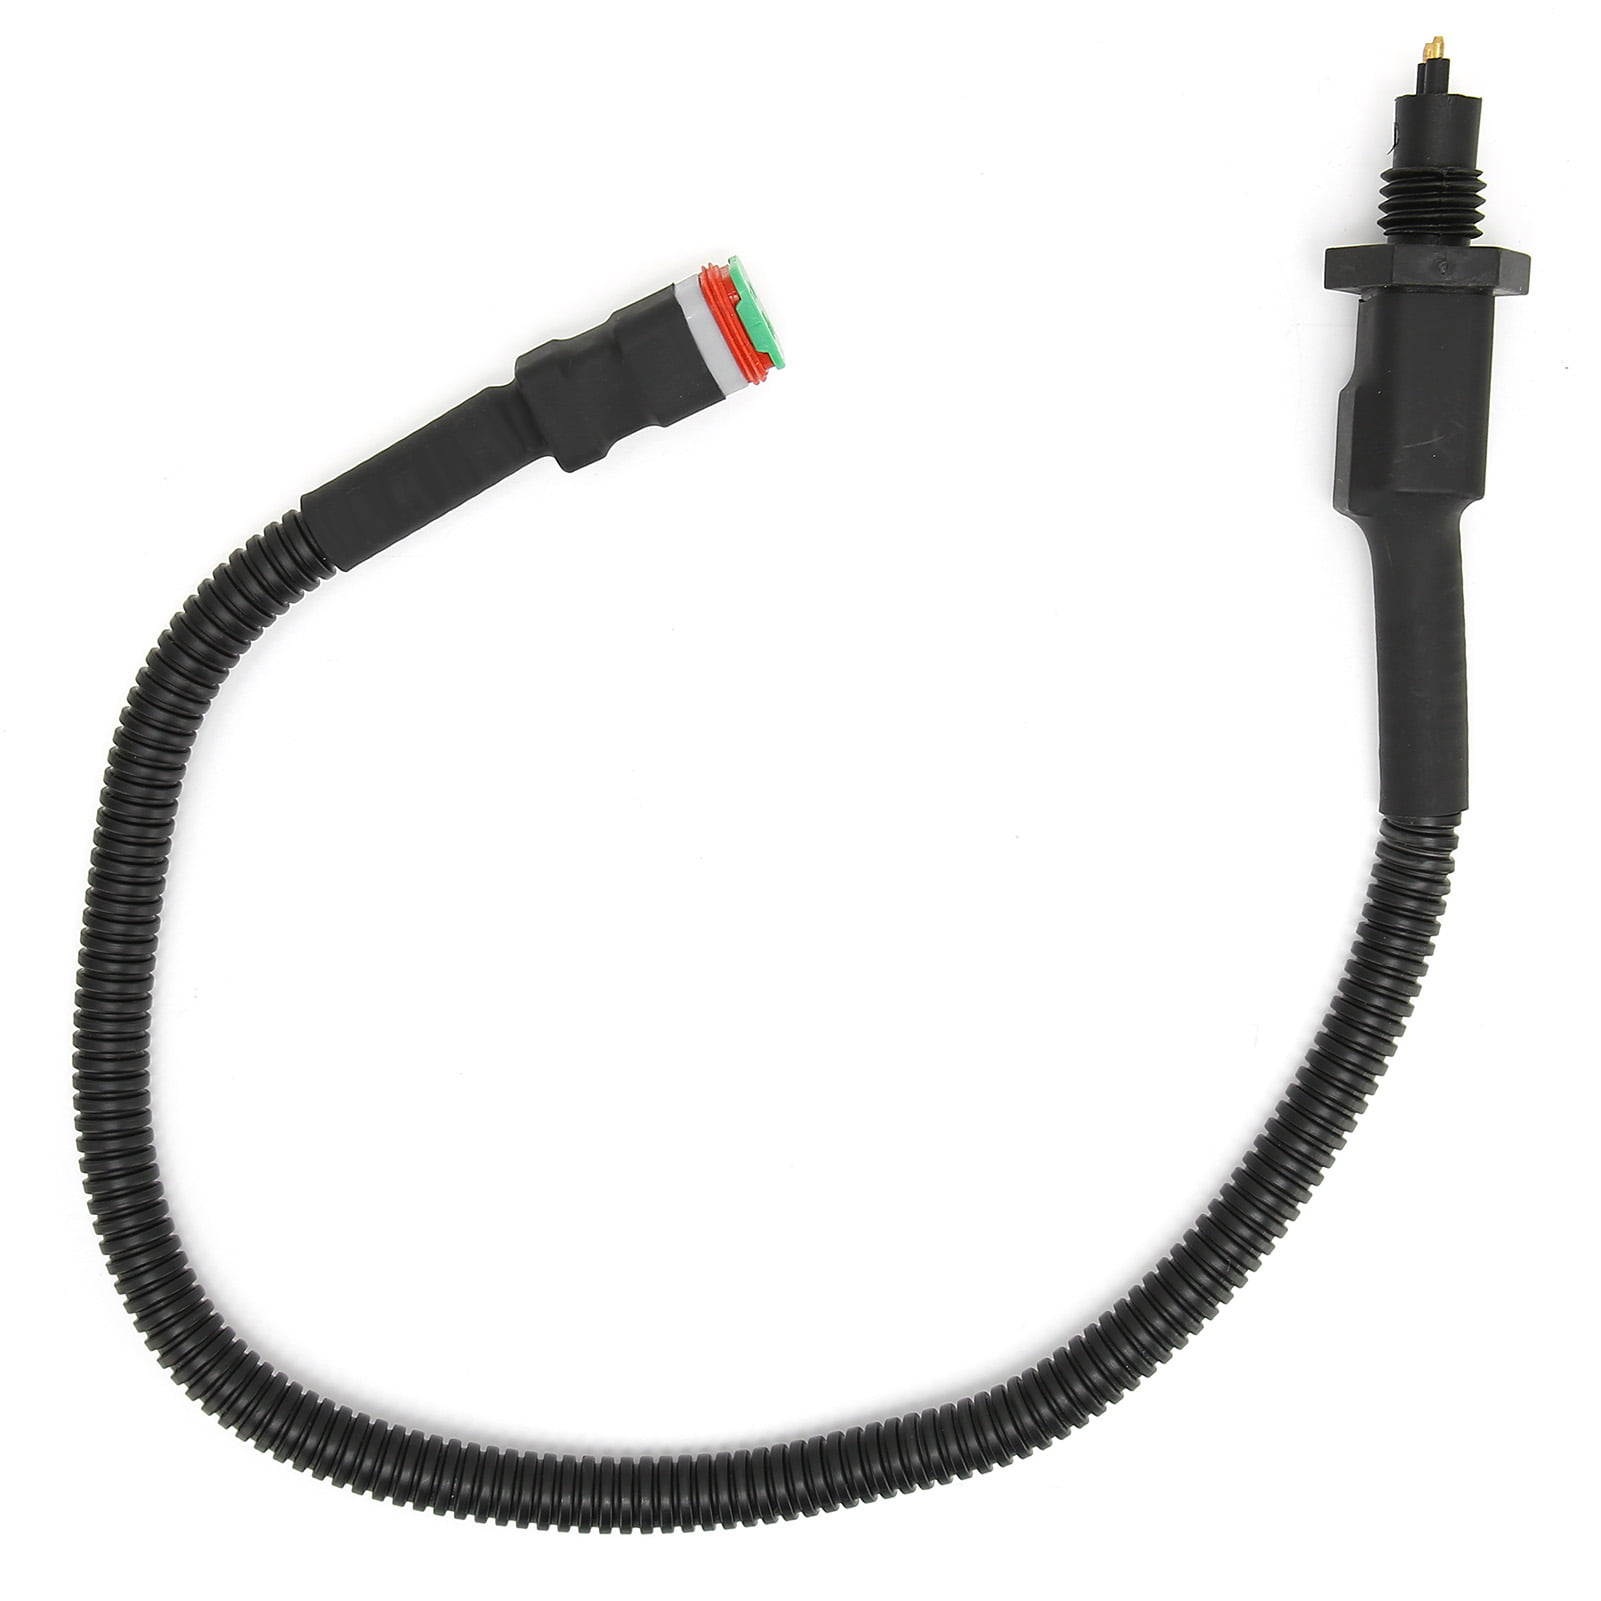 Withstand Harsh Road Fuel Sensor Oil Water Seperator Sensor for PC350-8 for PC300-8 for PC200‑8 600-311-3721/600-311-3722 